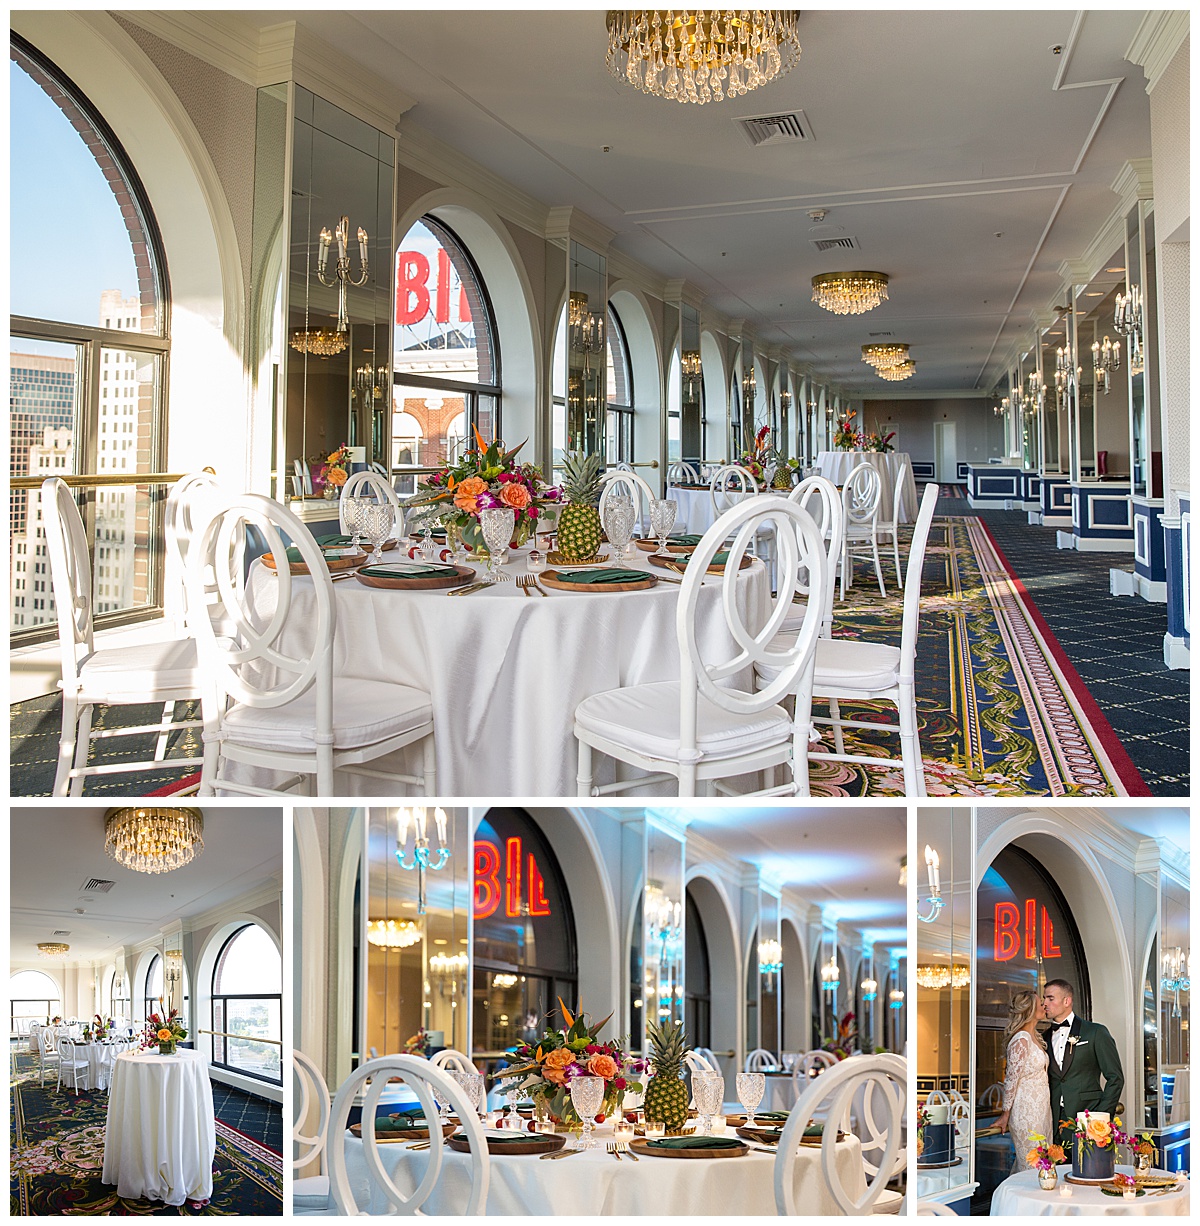 The Summit Room at the Graduate Hotel in Providence RI, offers breathtaking views of the city.